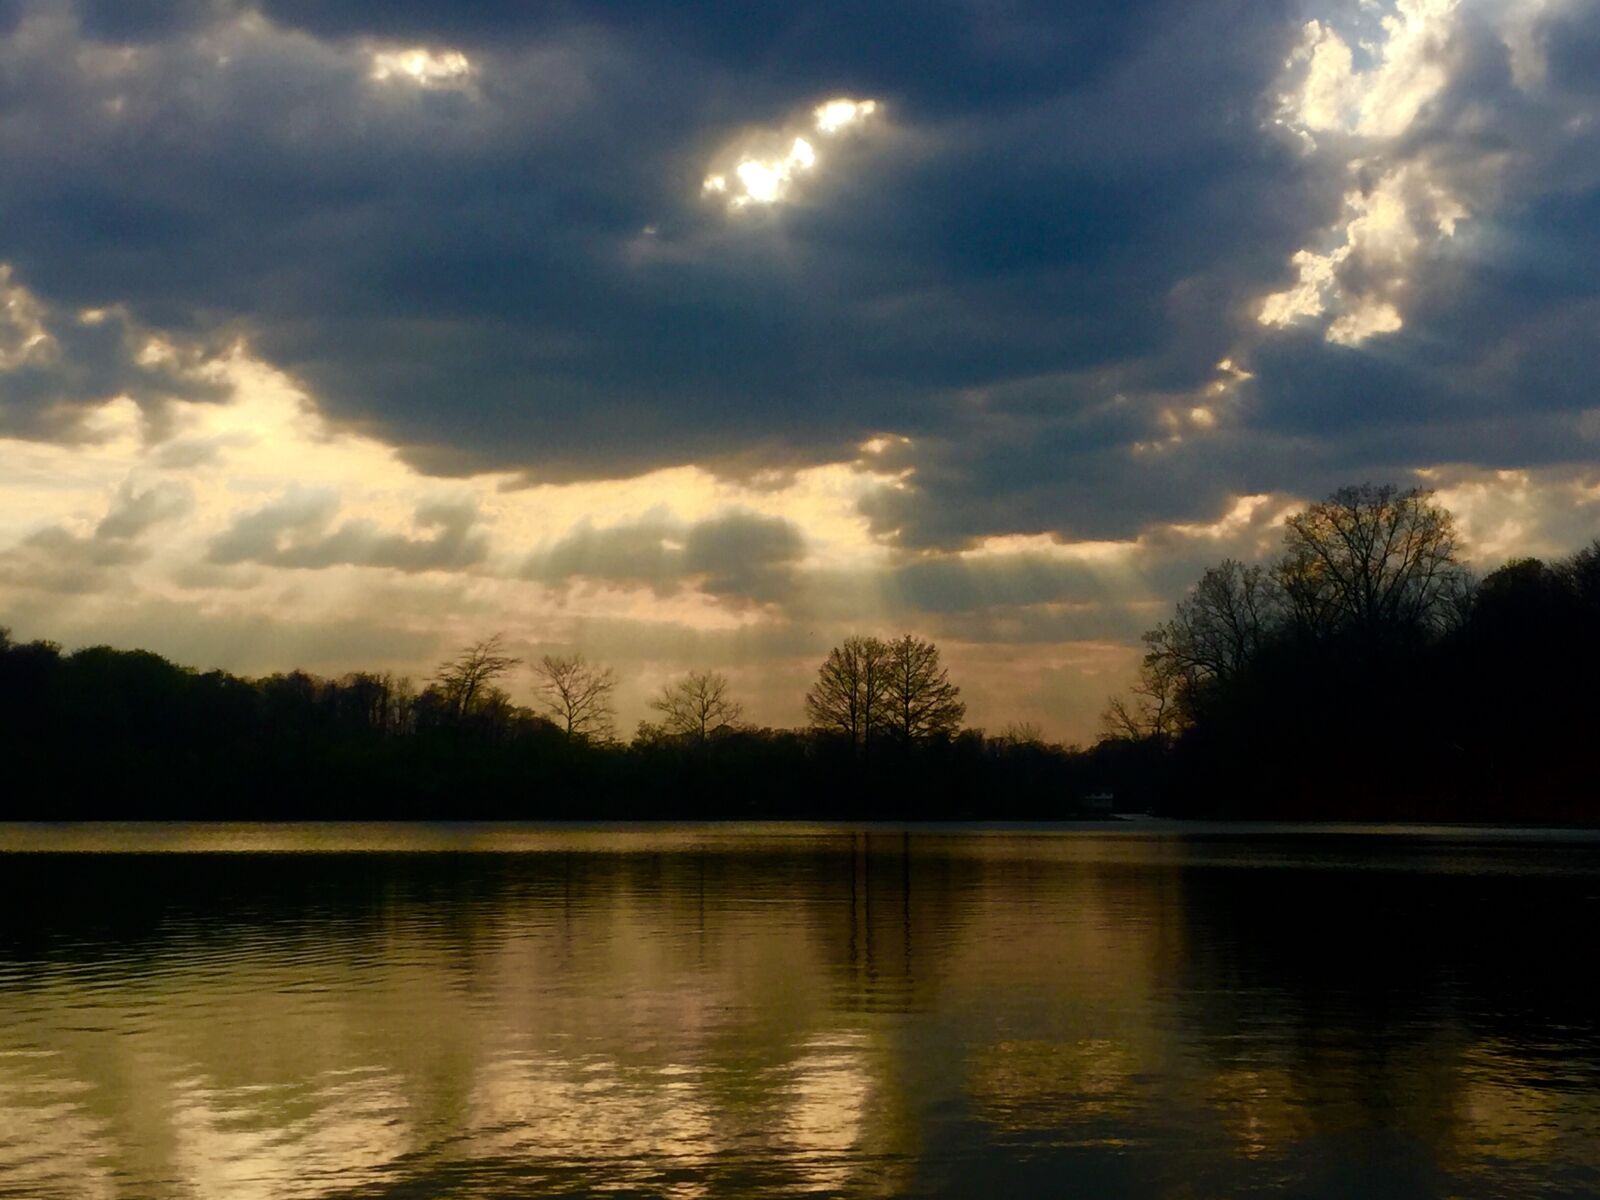 Apple iPhone 6 sample photo. Lake, clouds, sunlight photography